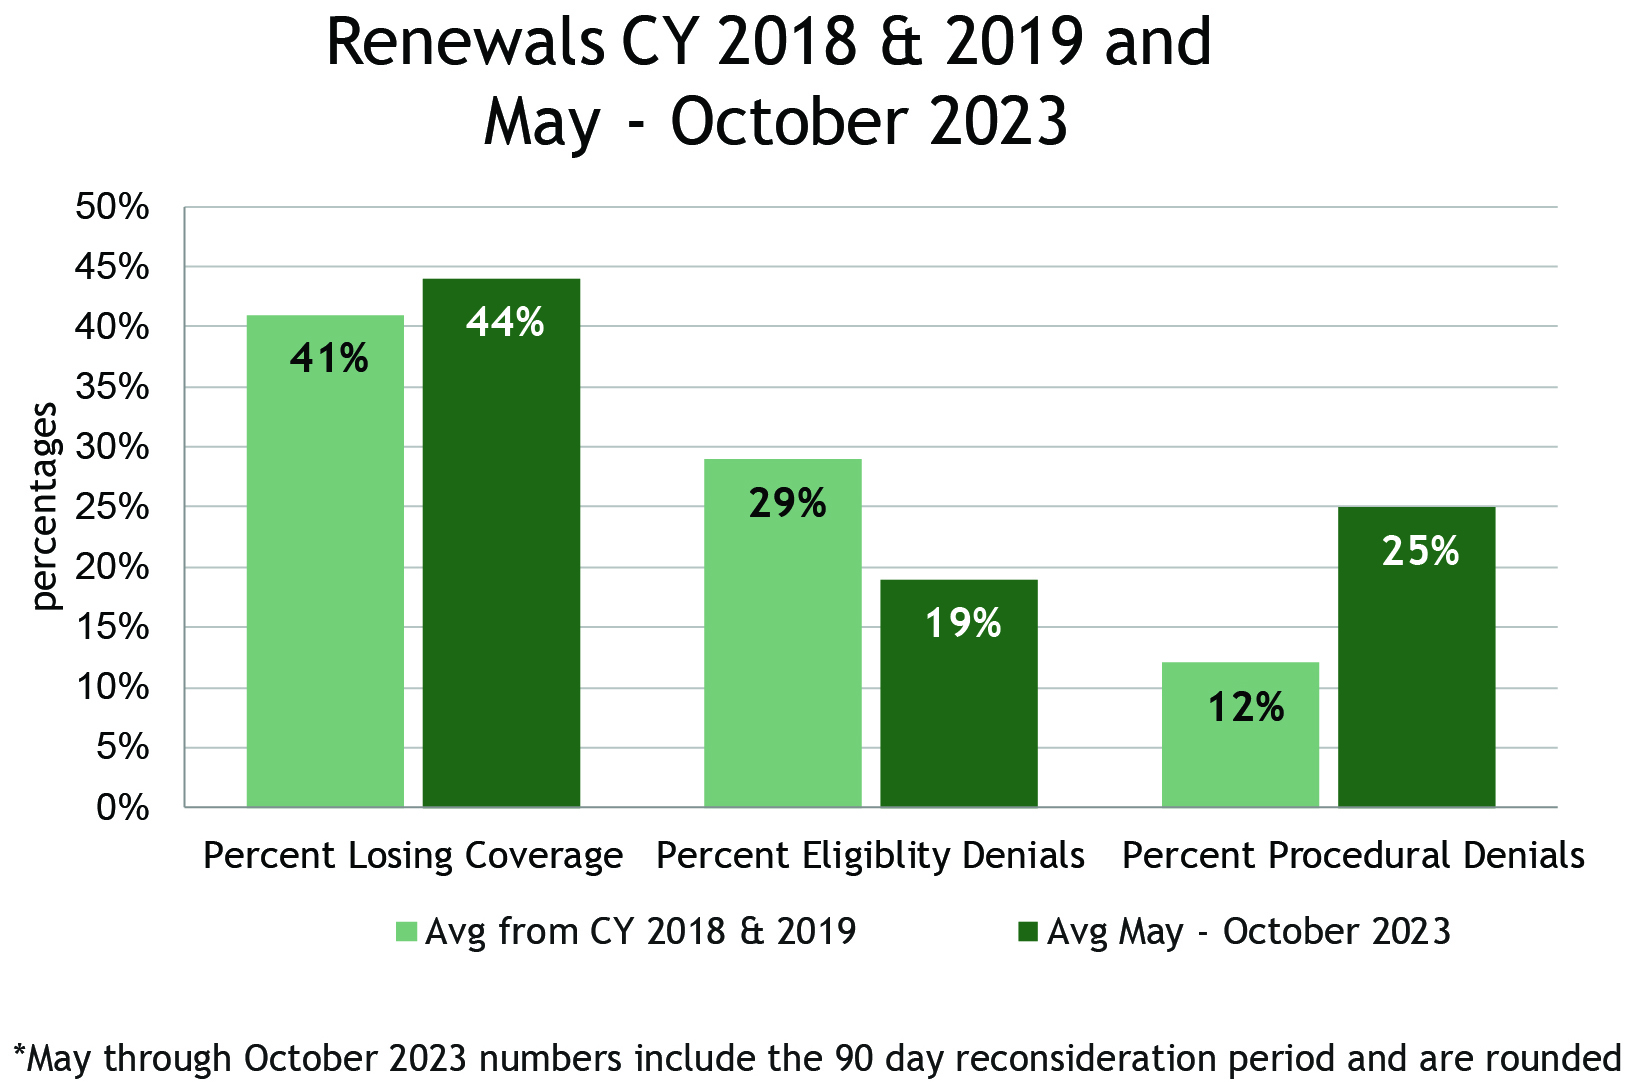 CY 18/19 and 2023 avgs bar chart: Bar chart of average renewals from calendar years 2018/19 and May through October 2023 showing losing coverage 2018/19 at 41% and May-Oct 2023 44%, eligibility denials 2018/19 at 29% and May-Oct 2023 19%, and procedural denials 2018/19 at 12% and May-Oct 2023 25%. May through October 2023 numbers include the 90 day reconsideration period and are rounded.